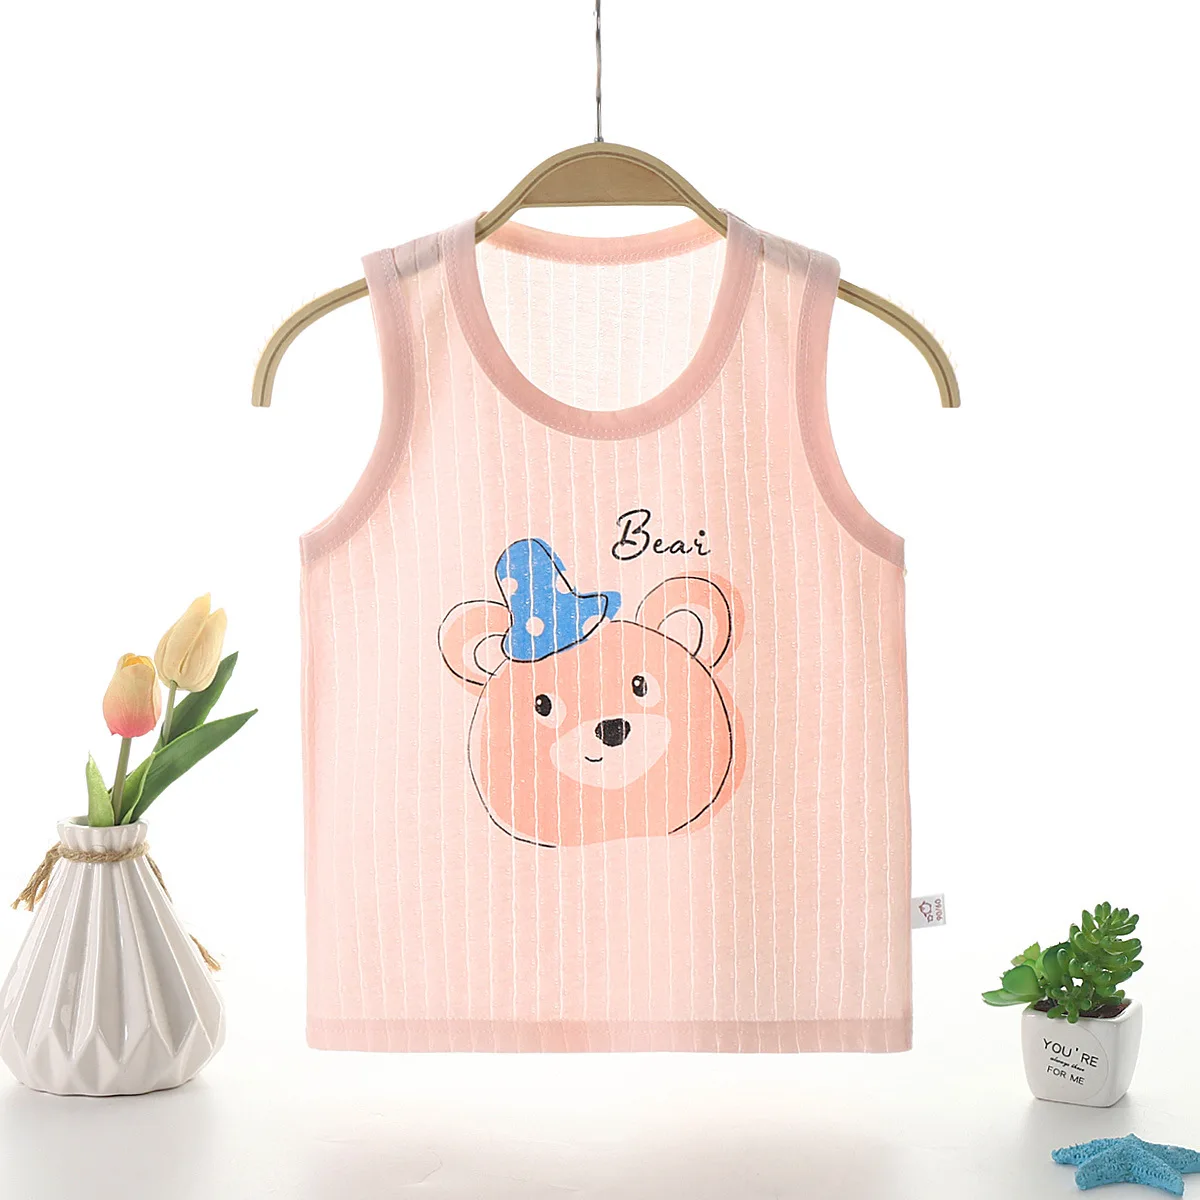 

2022 Summer New Cotton Vest, Long-staple Cotton, Silky, Breathable, Cute Cartoon Bottoming Shirt for Young Boys Aged 3-8 2PCS